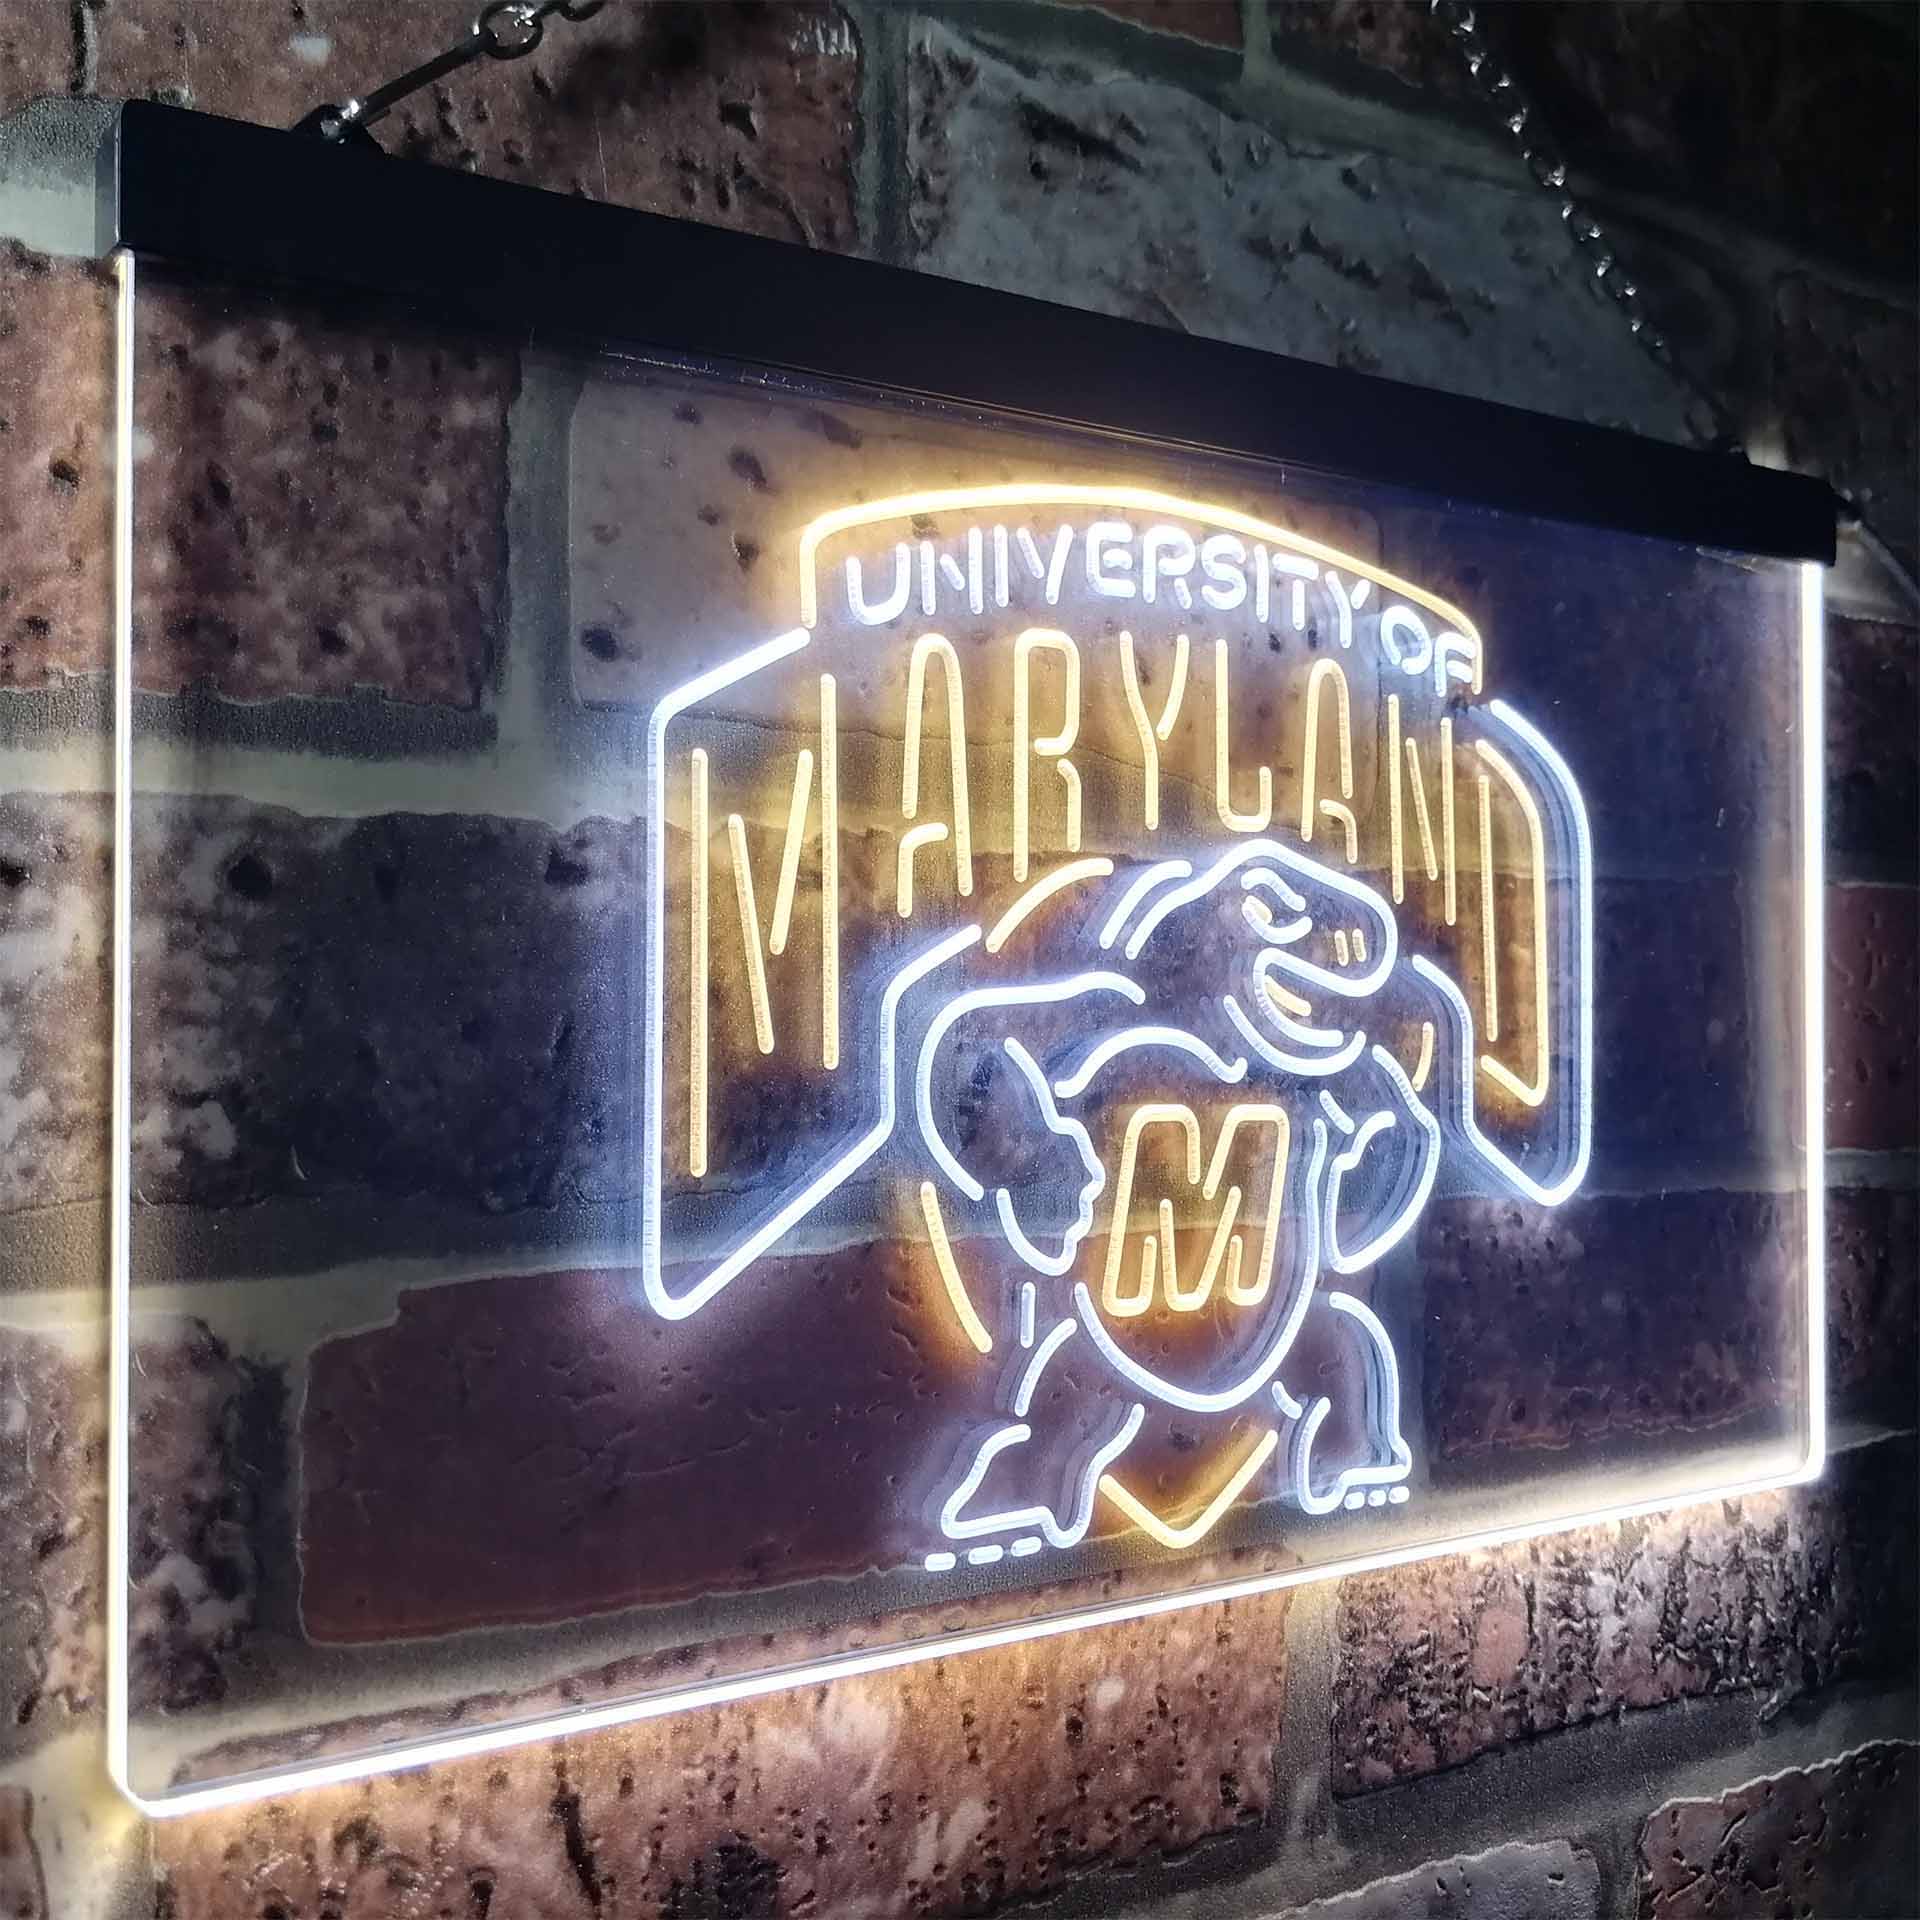 University Of Maryland Club Terrapinses Man Cave Neon Sign